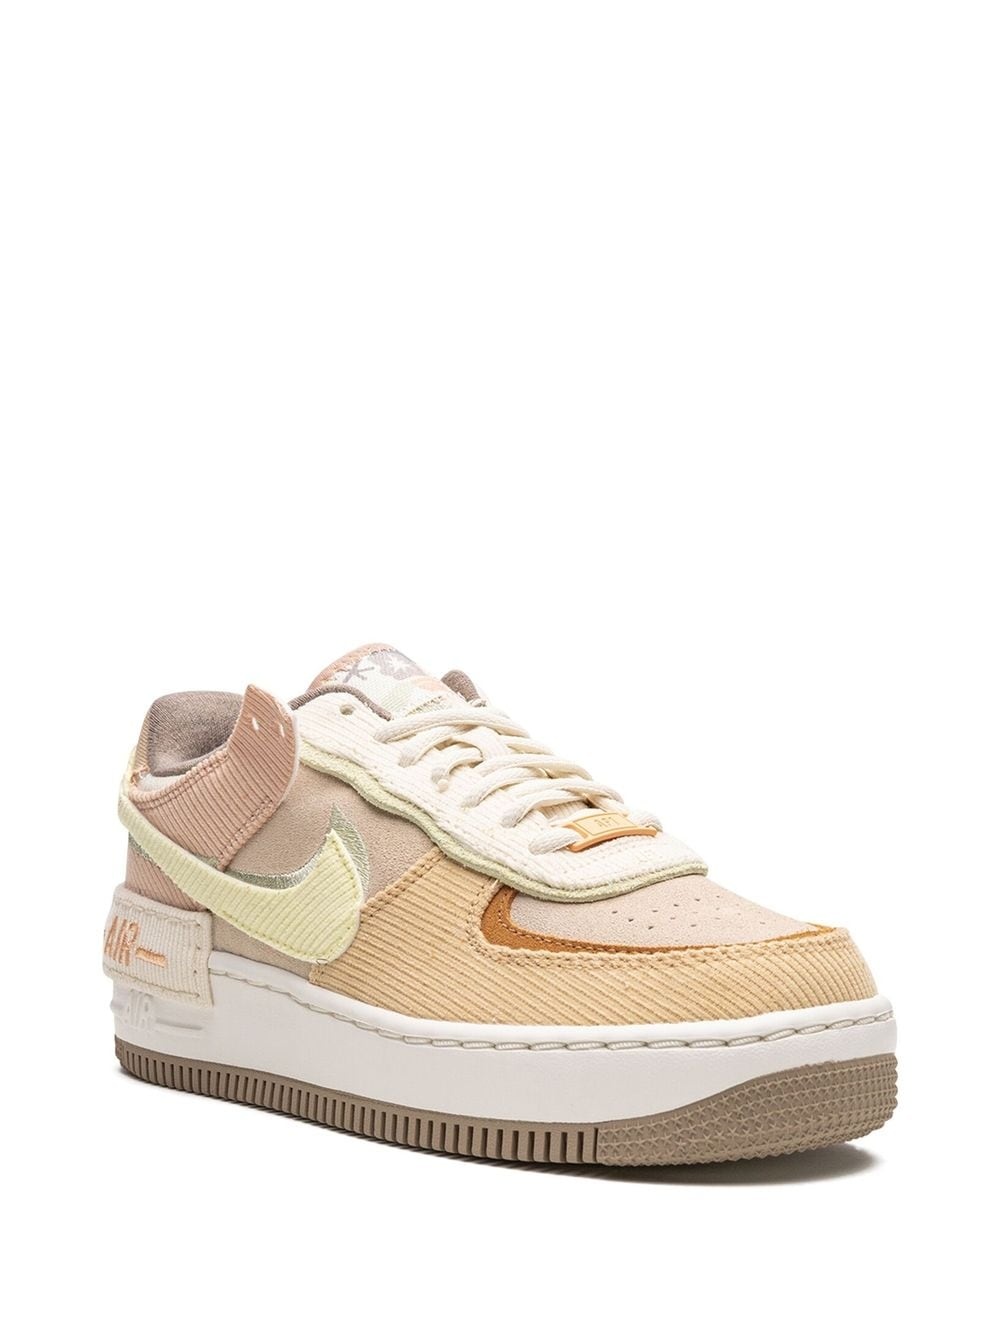 AF1 Shadow "Coconut Milk/Citron Tint" sneakers - 2